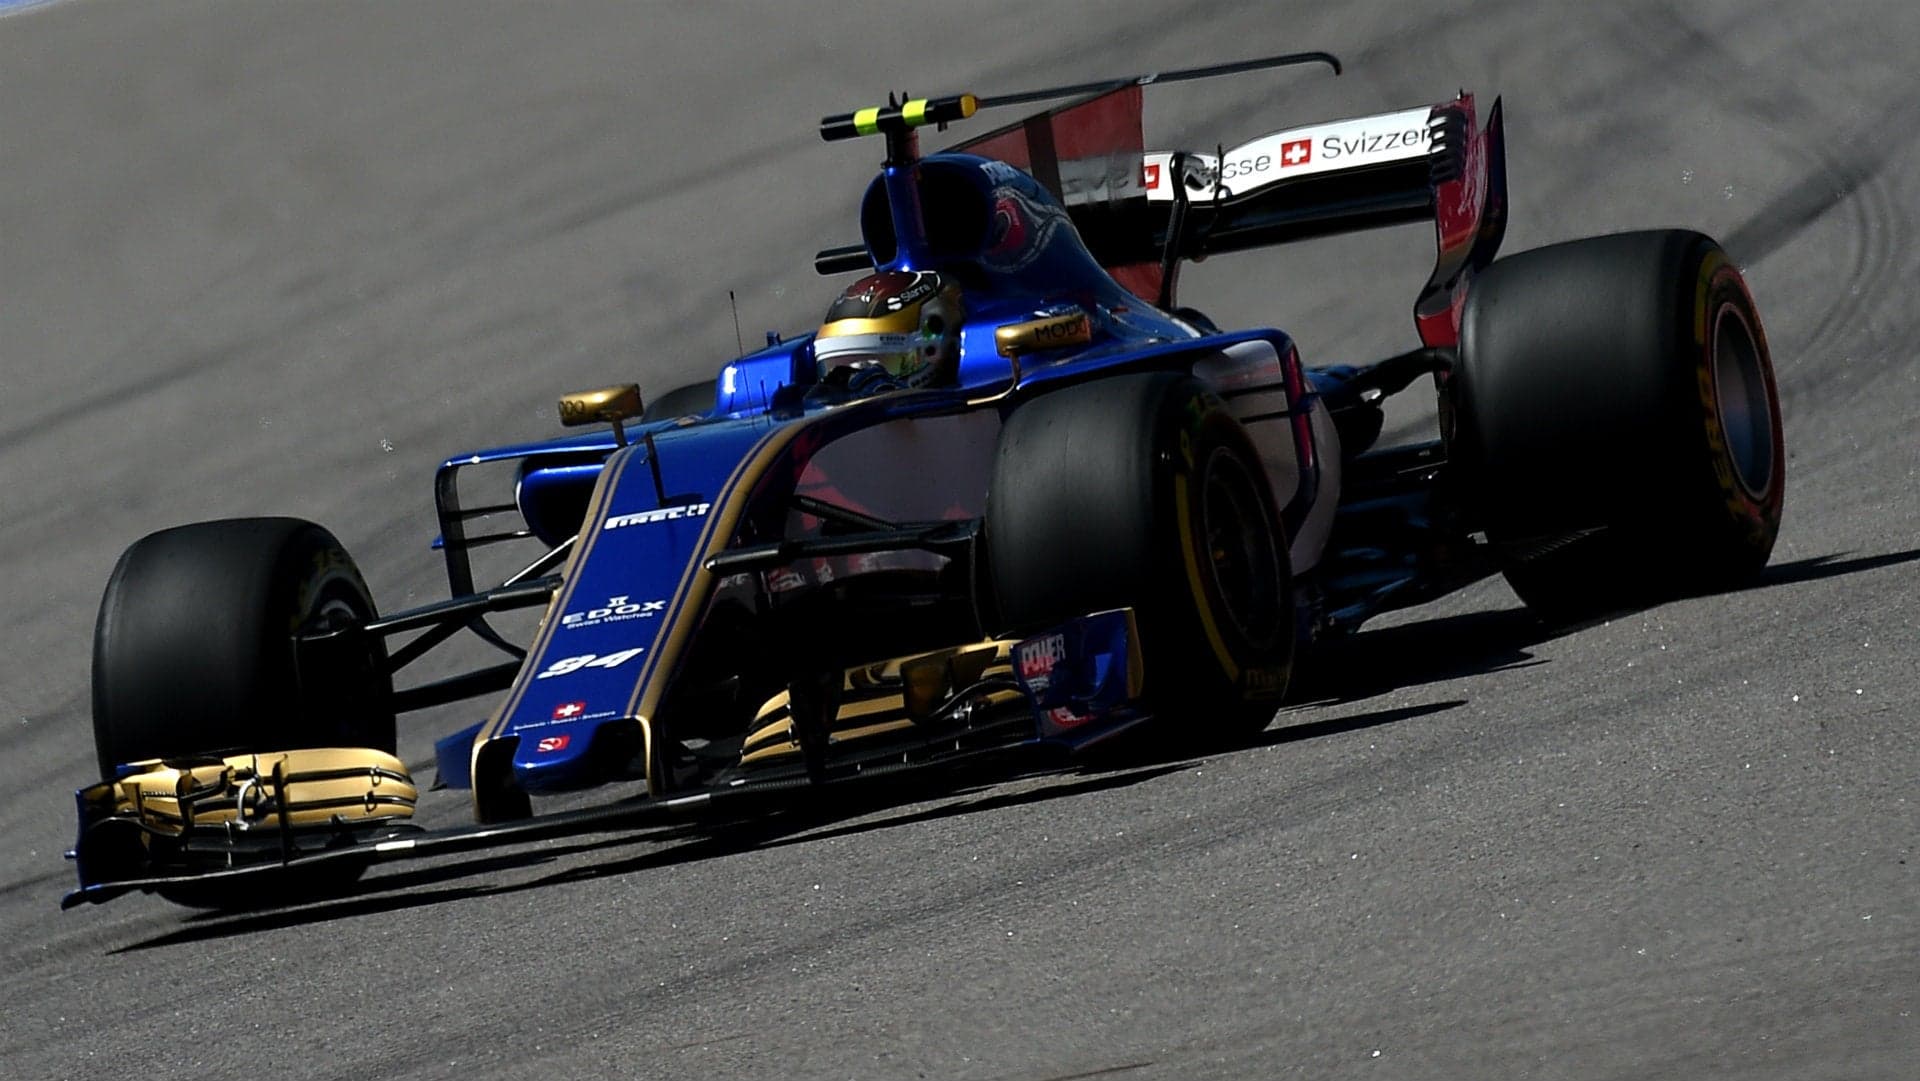 Will Sauber F1 Team Be Capable of Points in Monaco?